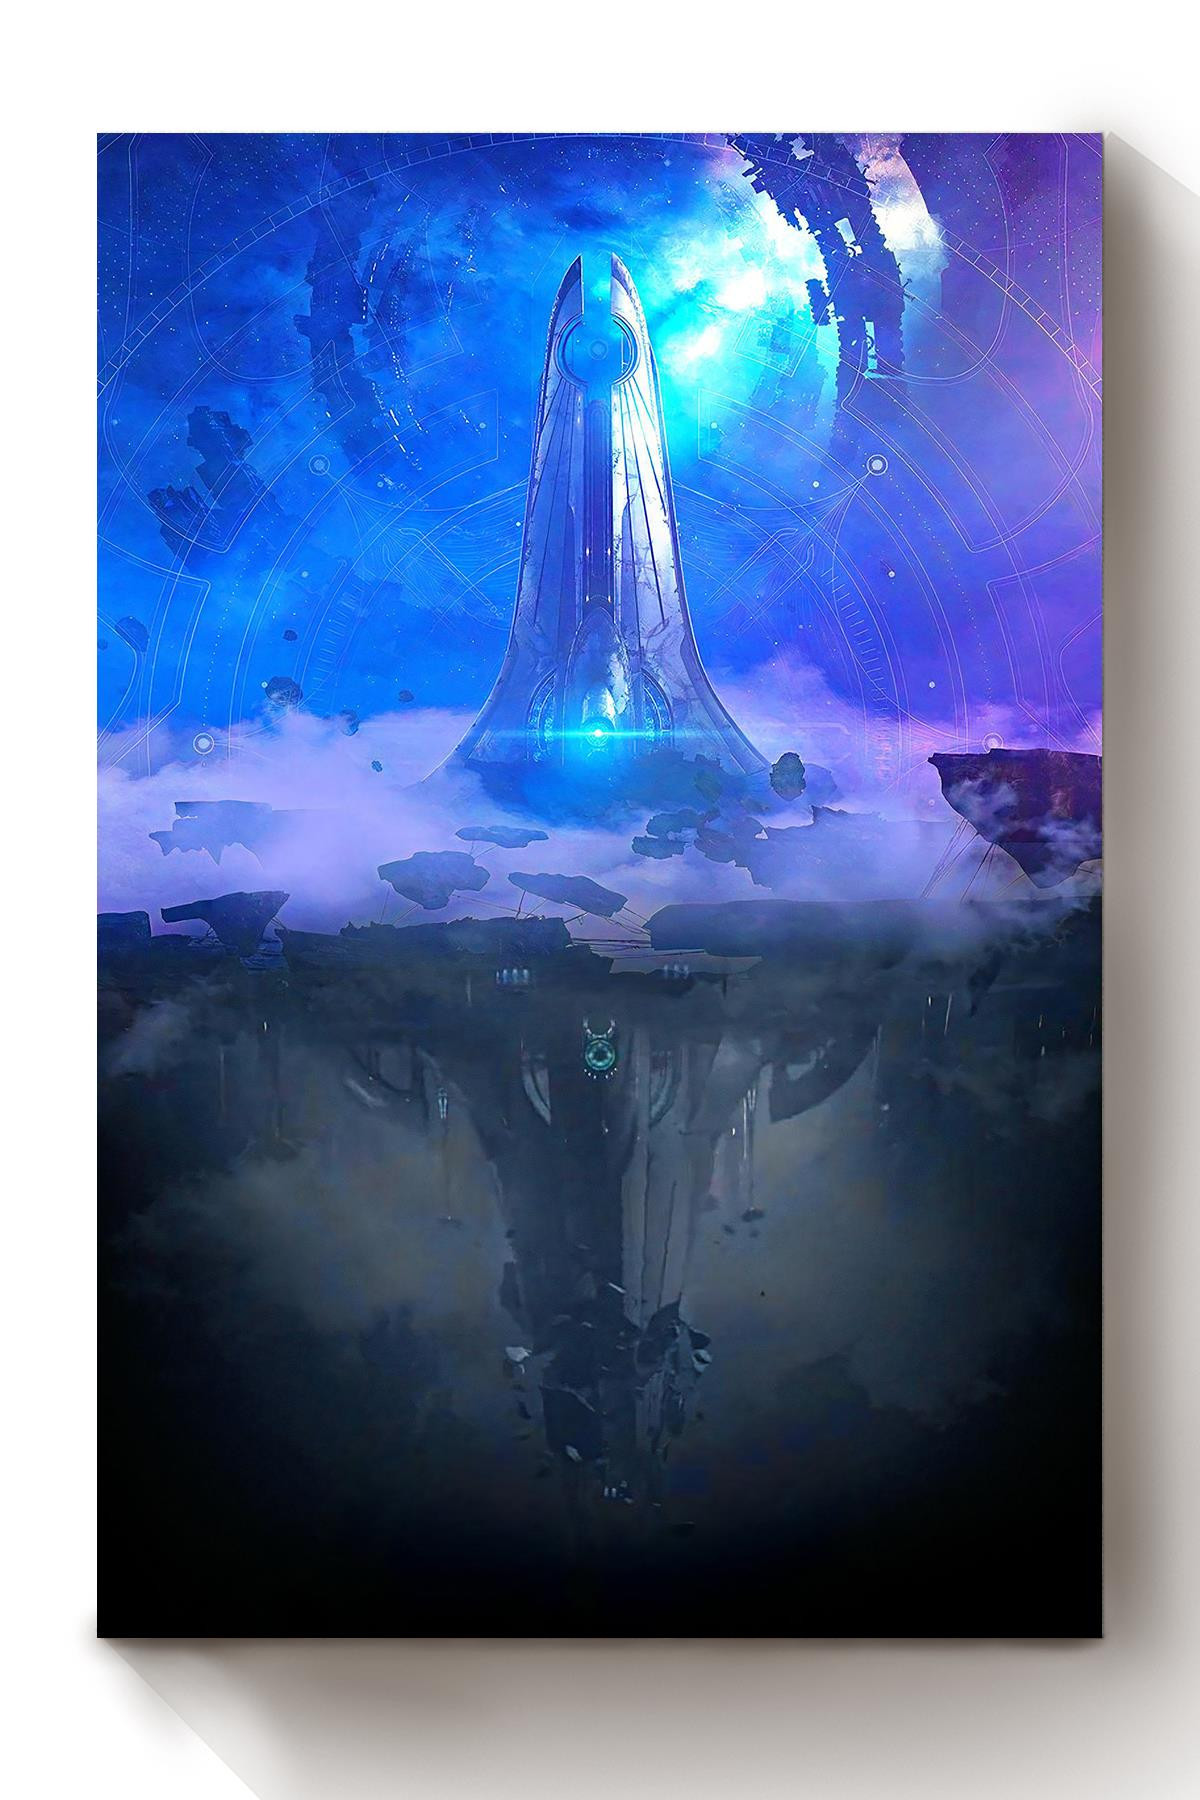 Destiny 2 Mmo Game Dreaming City Cool Pvp Game Canvas Wrapped Canvas 8x10